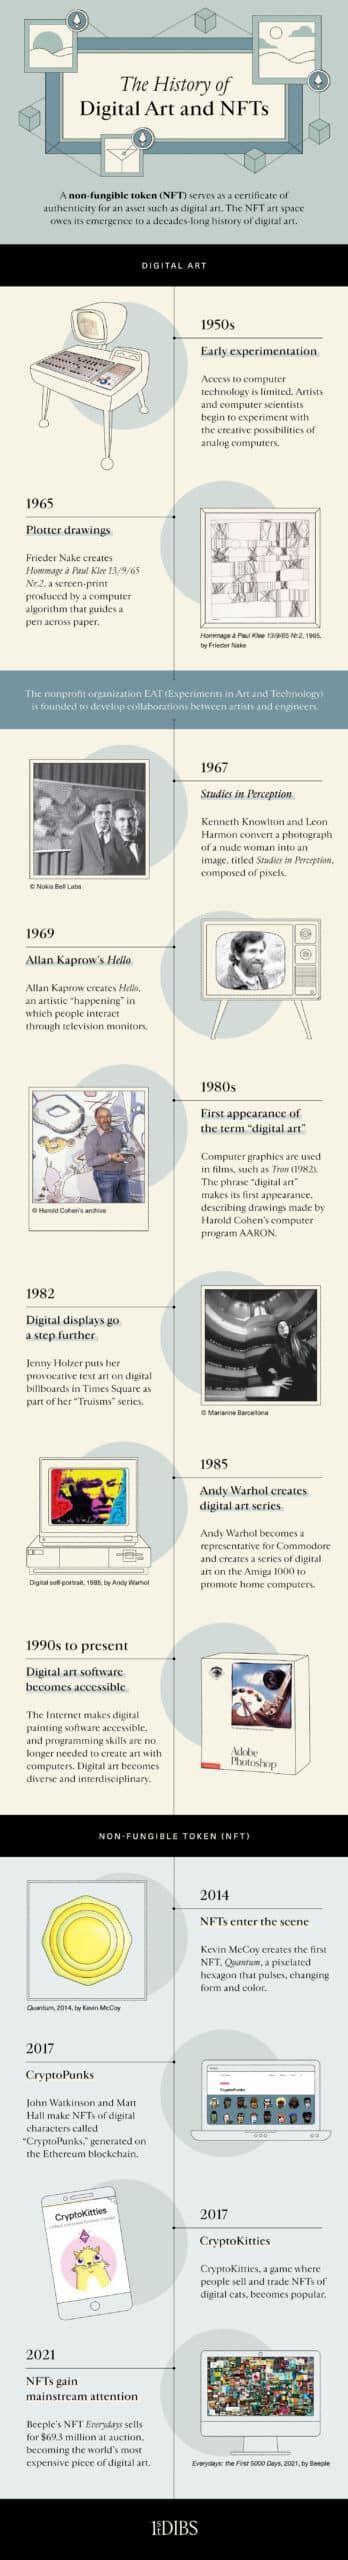 history of digital art and NFT infographic